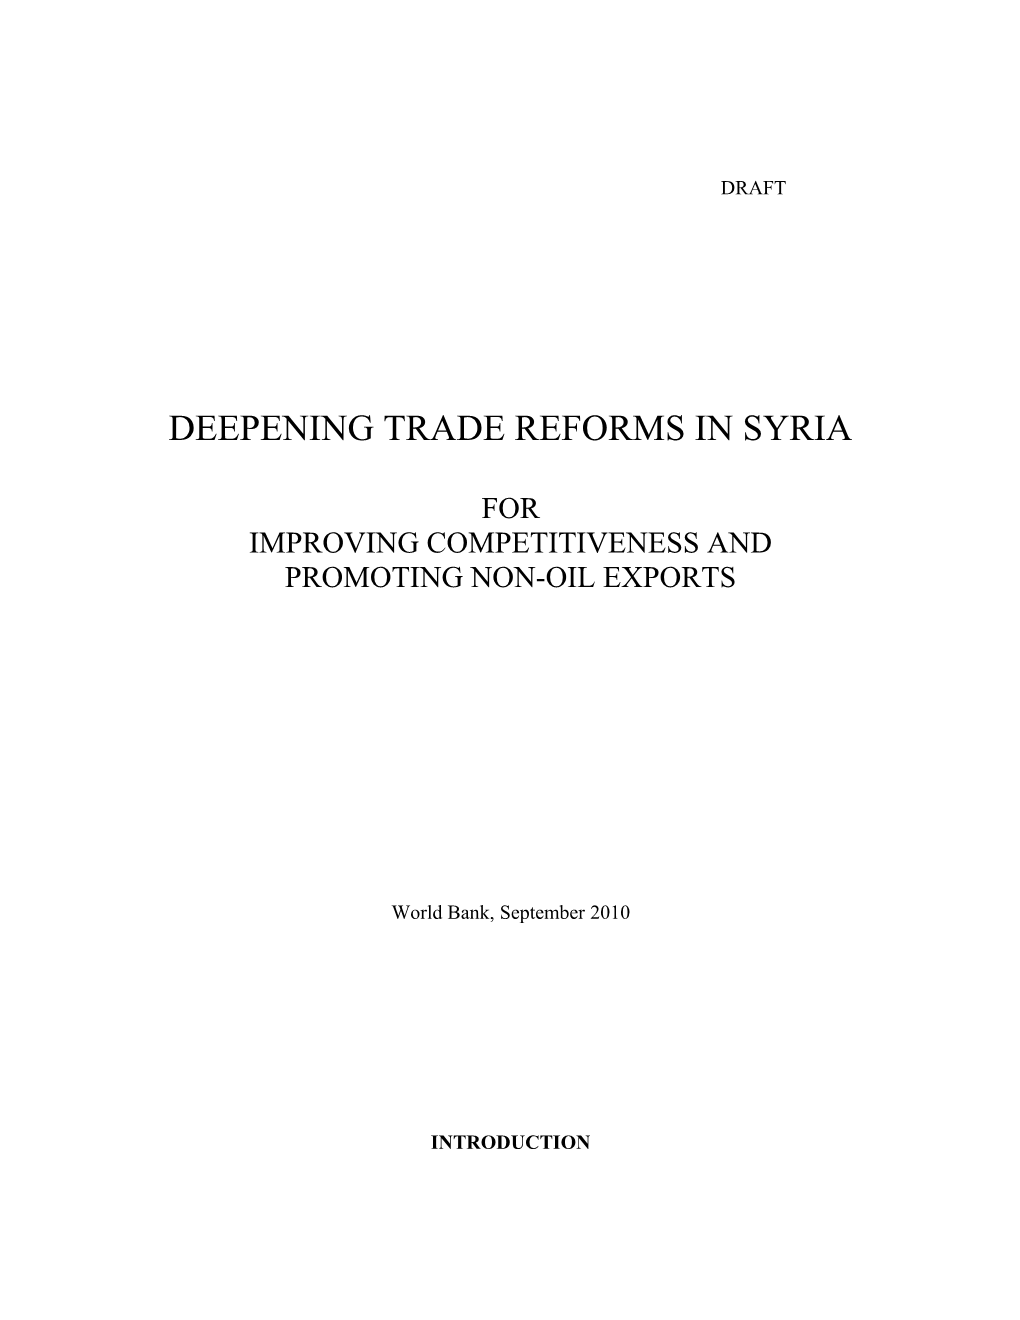 Deepening Trade Reforms in Syria